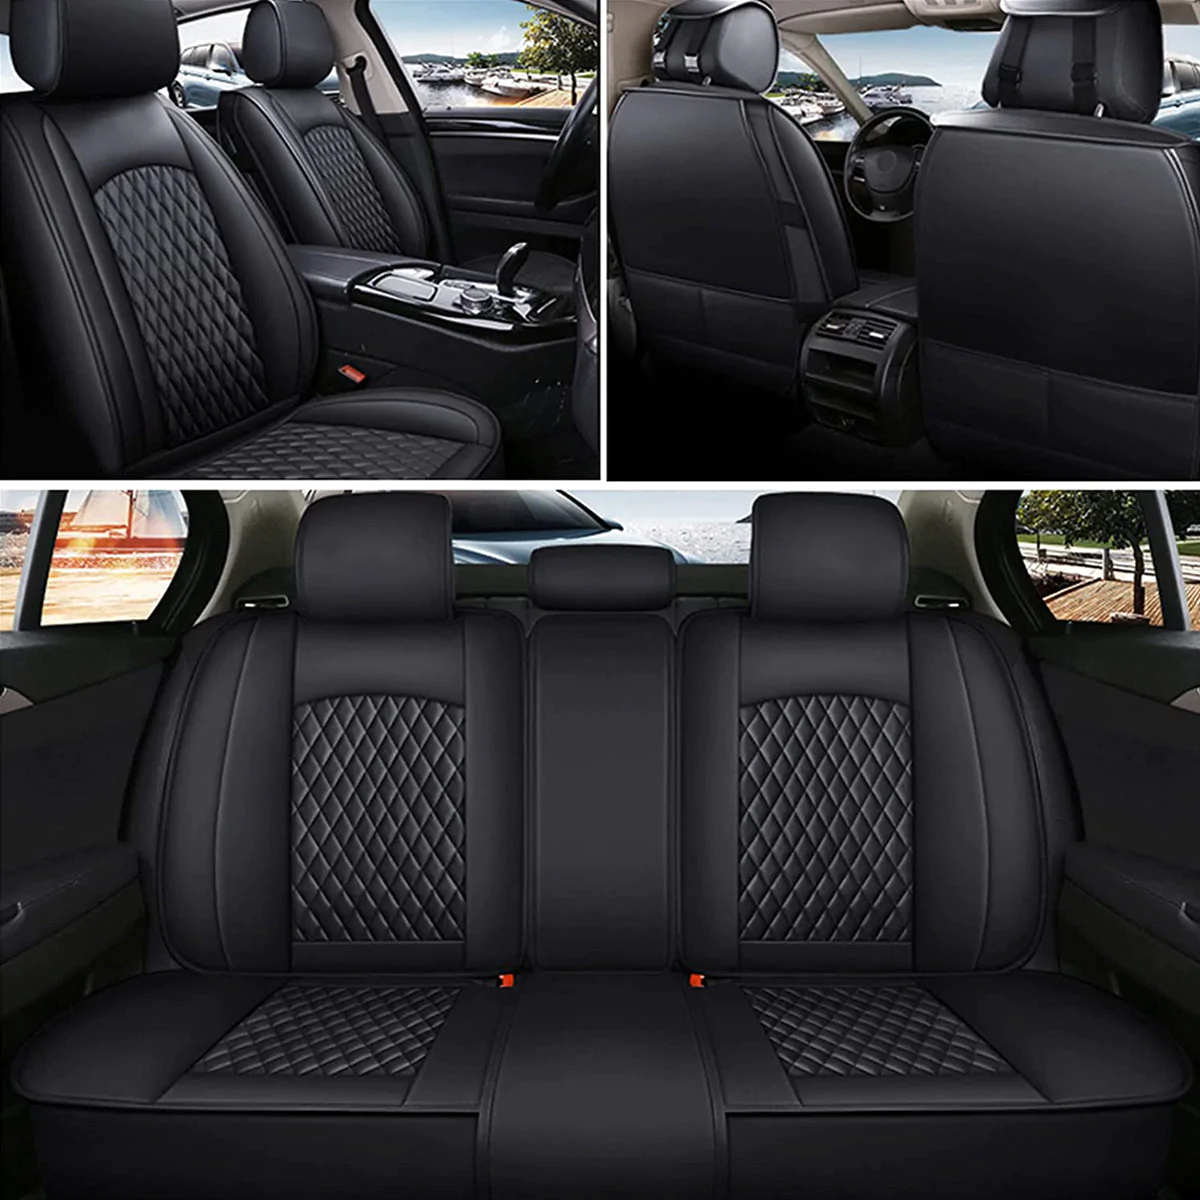 Custom Text For Seat Covers 5 Seats Full Set, Custom Fit For Your Cars, Leatherette Automotive Seat Cushion Protector Universal Fit, Vehicle Auto Interior Decor AR13988